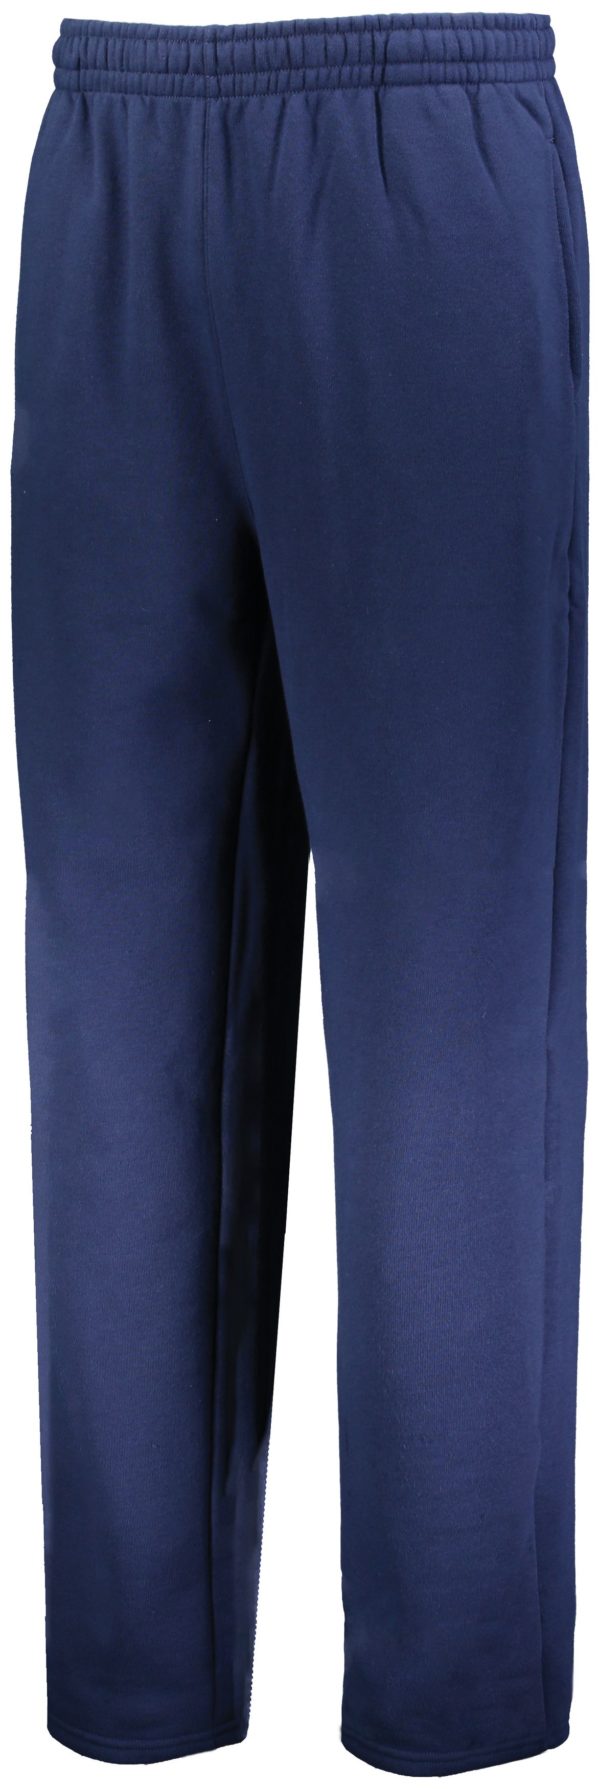 Russell 80/20 OPEN BOTTOM SWEATPANT NAVY